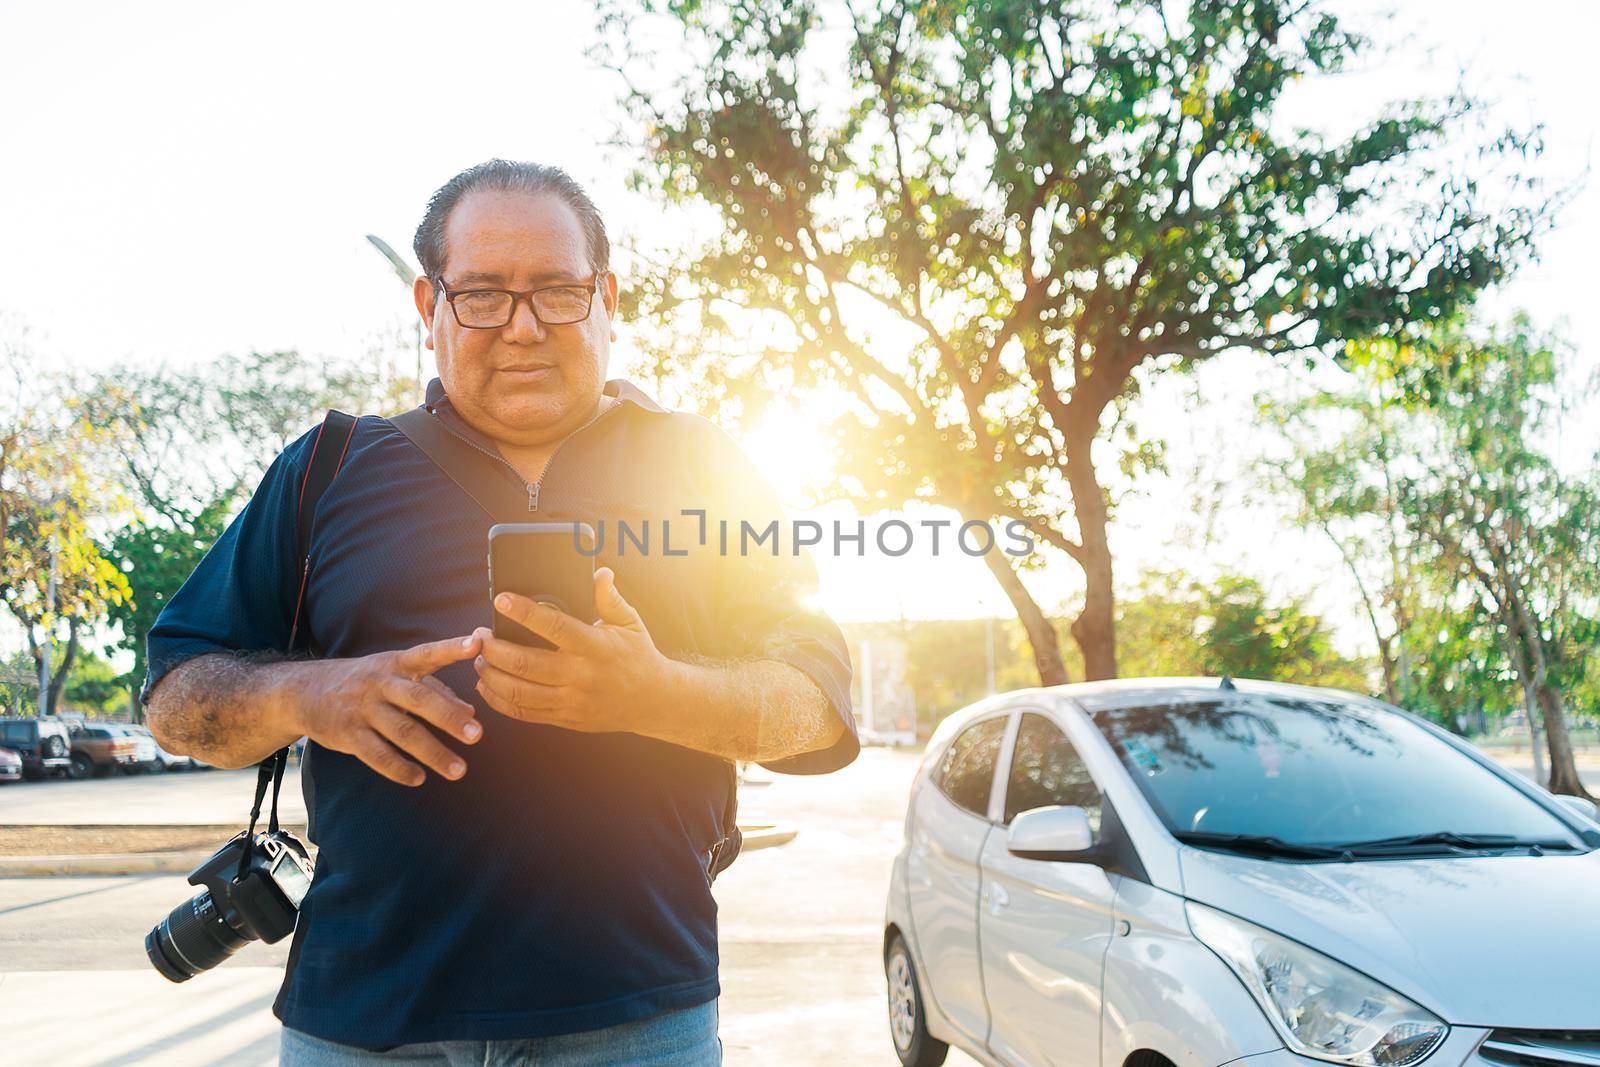 Local tourist mature Latin man using his cell phone and a camera hanging from his shoulder during sunset in a Nicaraguan outdoor park